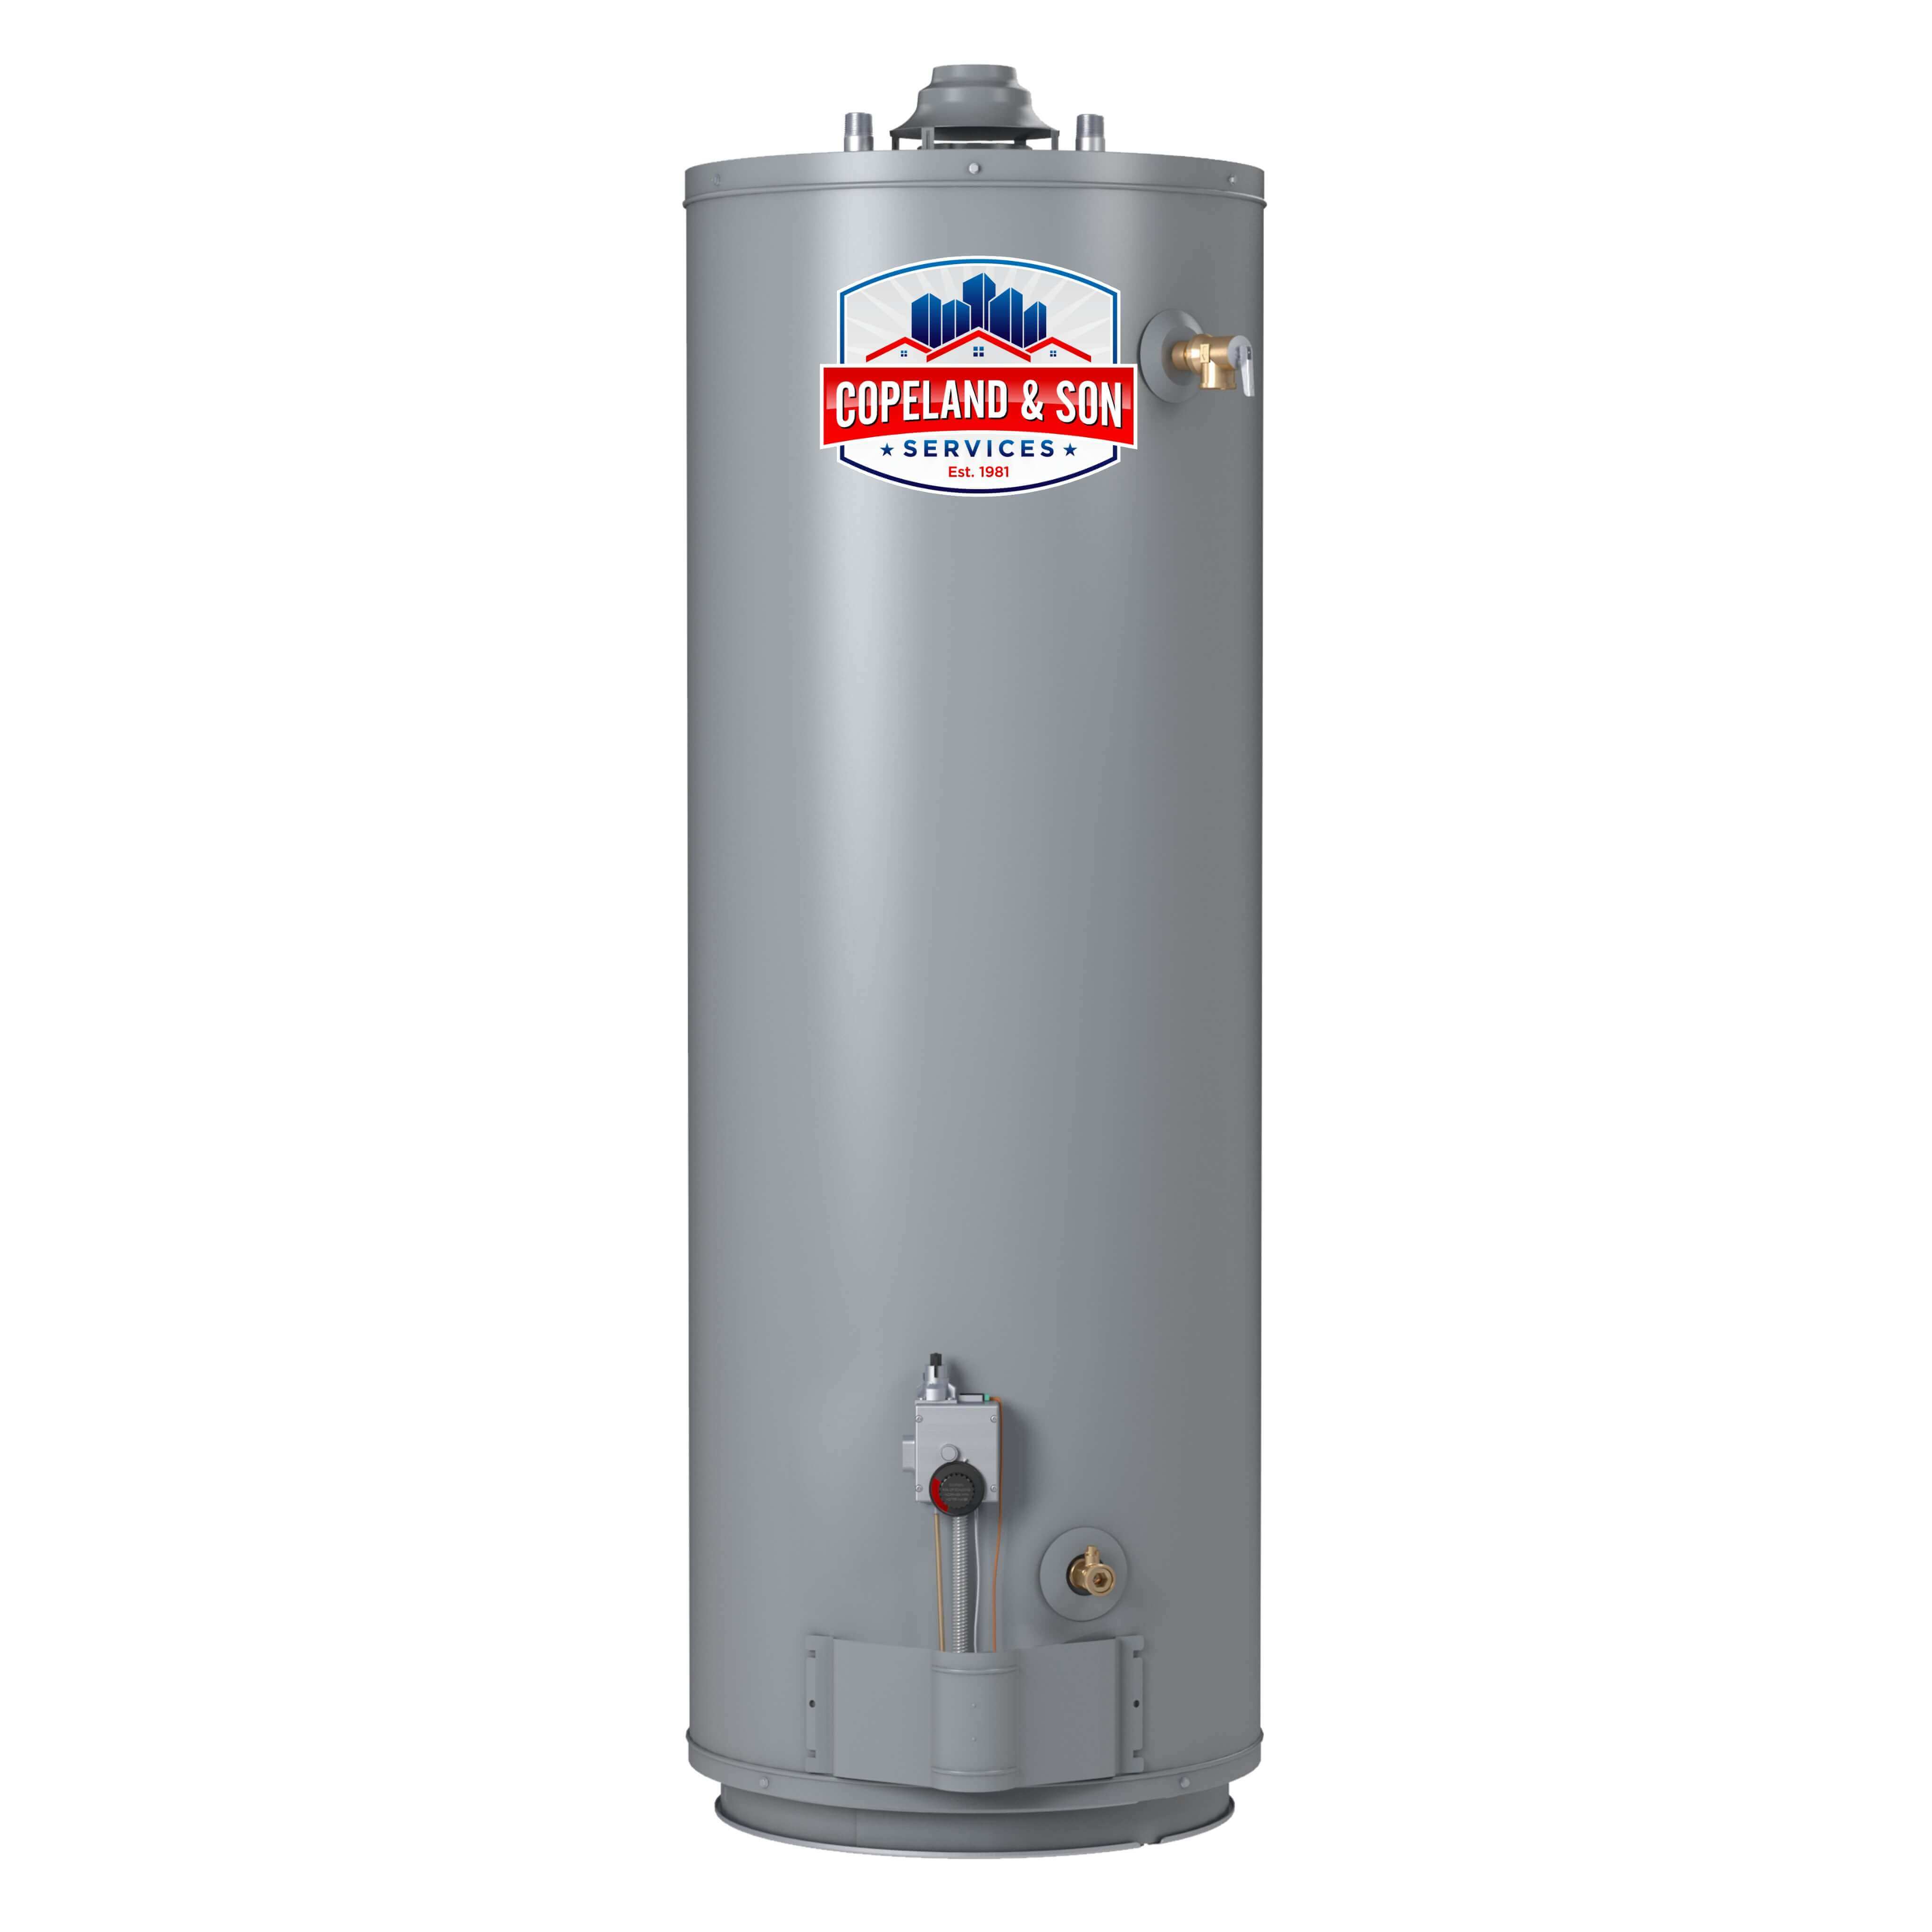 For information on water heater installation near Brentwood TN, email Copeland & Son Services.